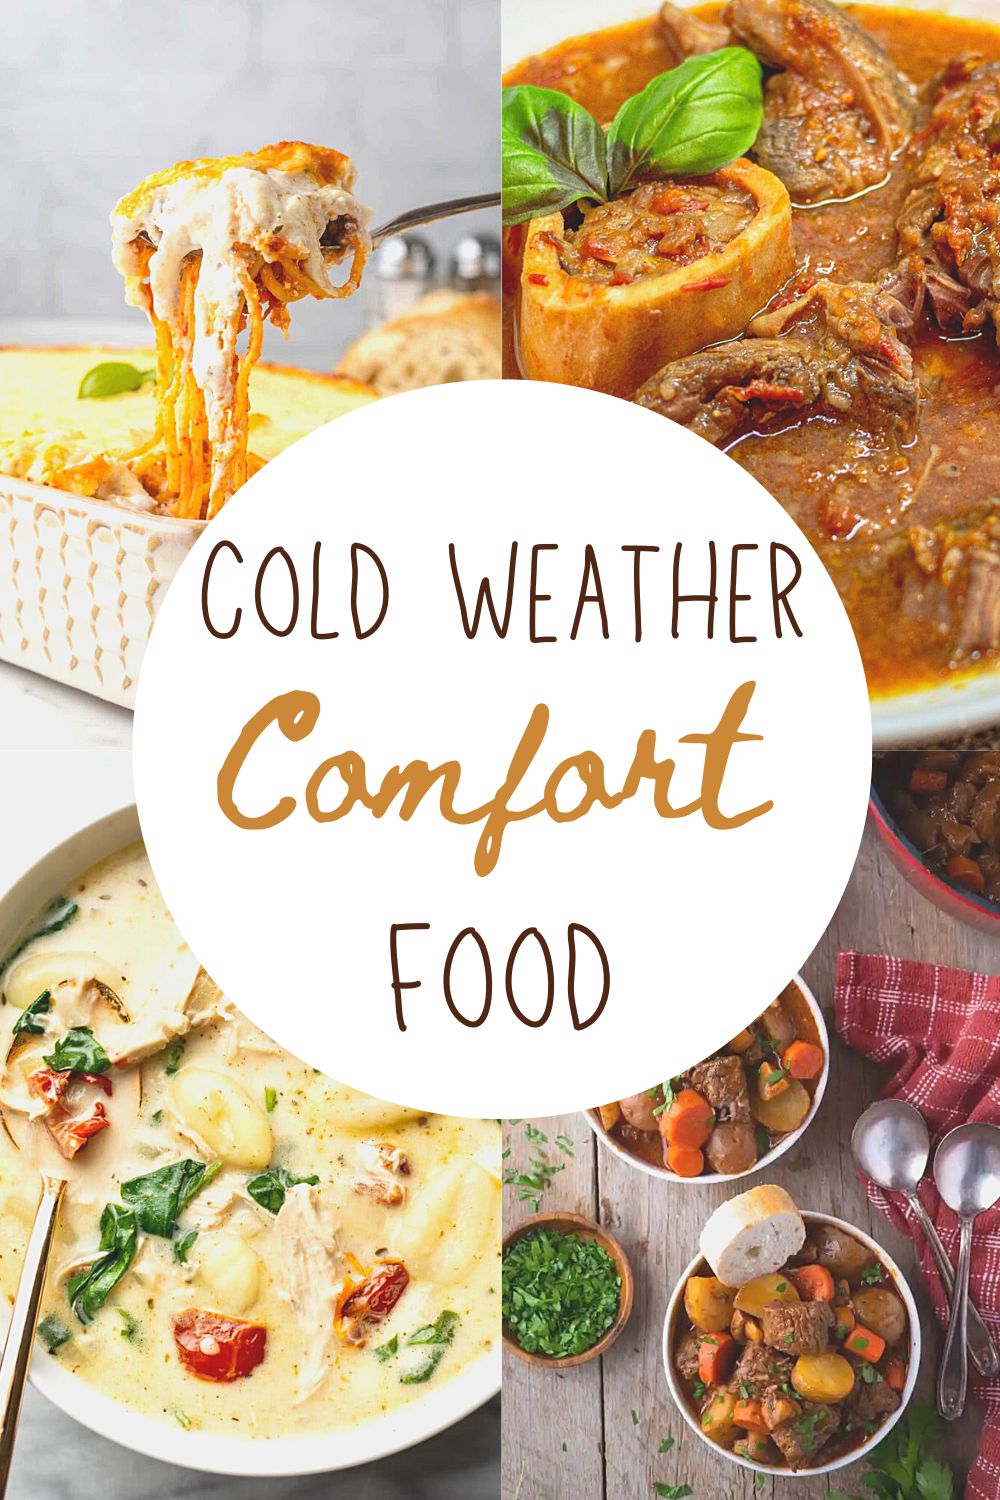 A composite picture is shown with four food dishes. One is a cheesy pasta dish. One is osso bucco. One is a chowder. And the last is a stew. The words "cold weather comfort food" appear in a white circle in the center of the image.